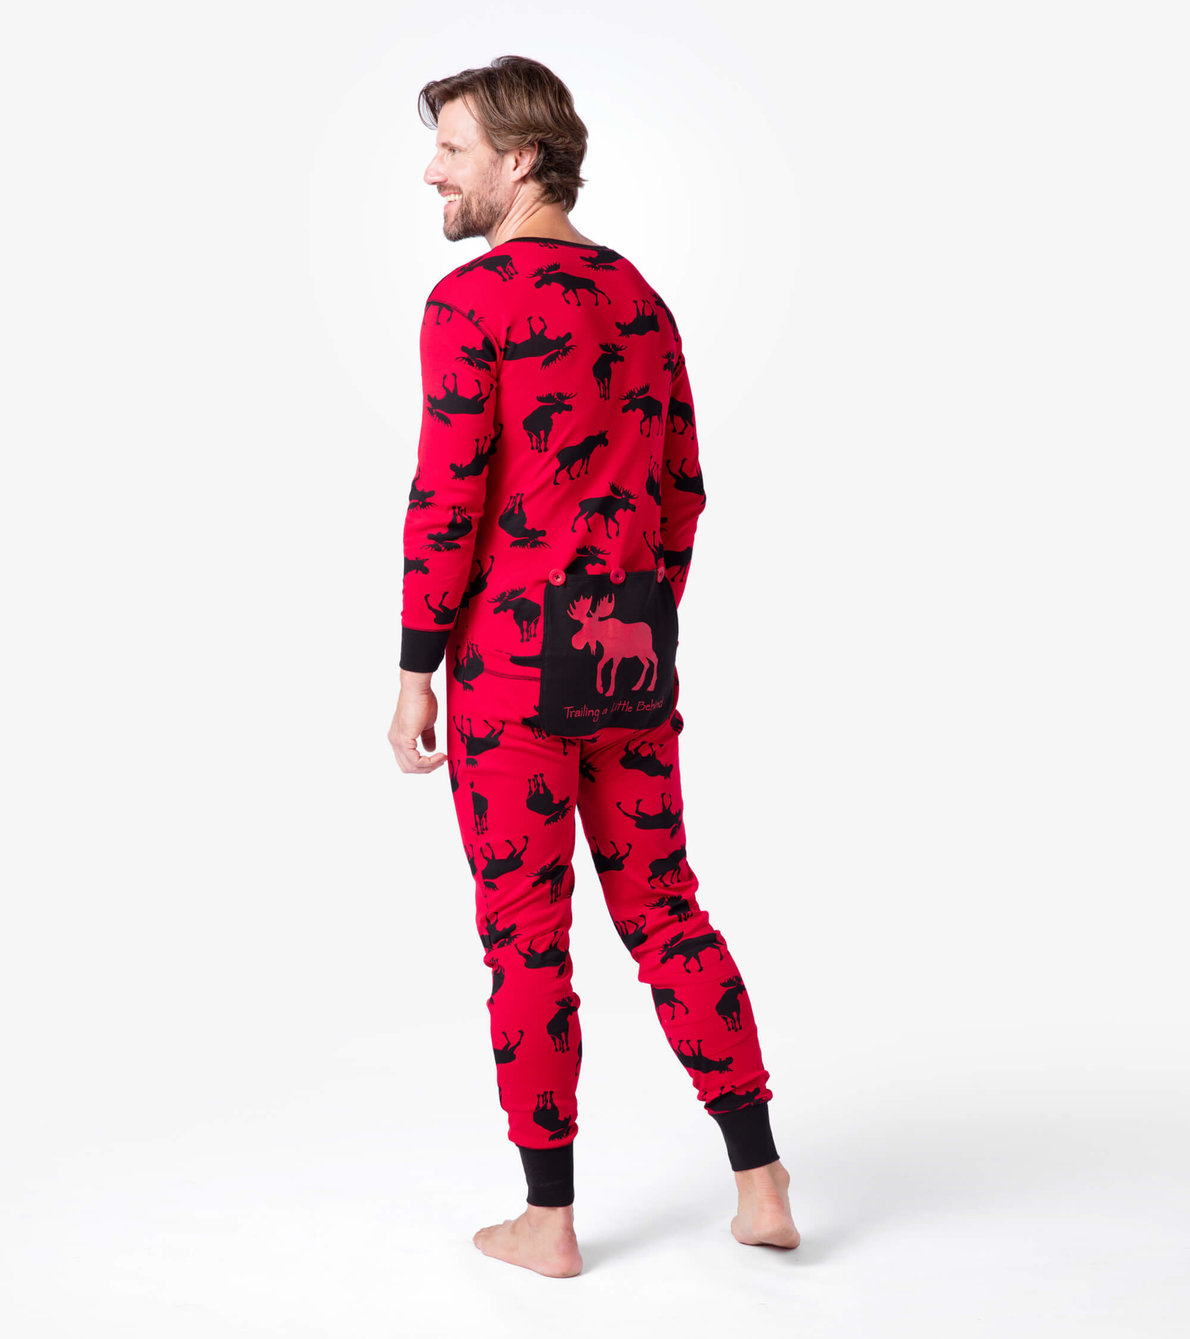 View larger image of Moose on Red "Trailing Behind" Adult Union Suit